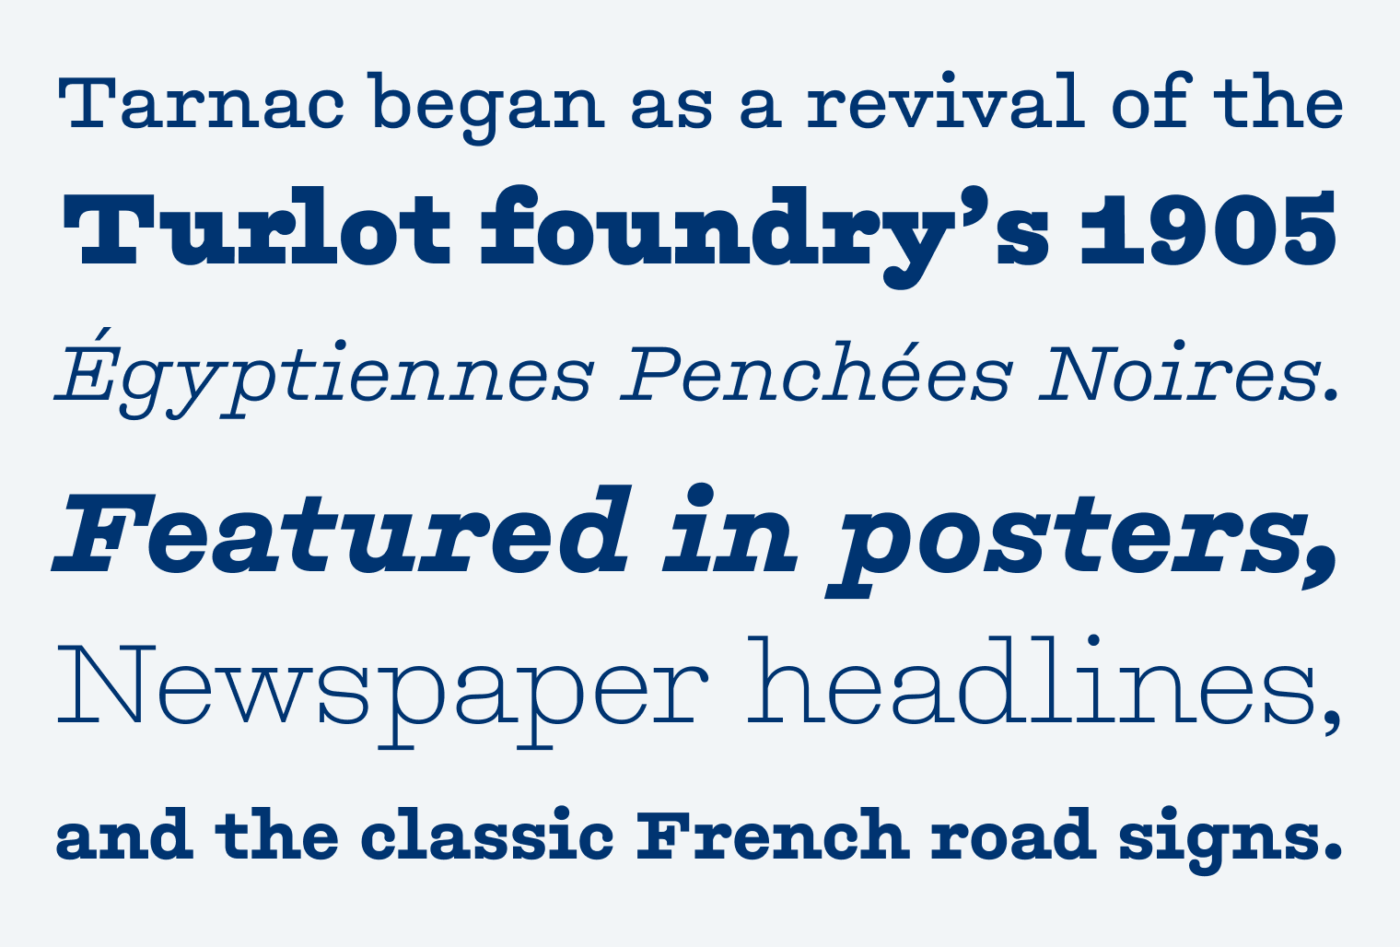 Tarnac began as a revival of the Turlot foundry's 1905 Égyptiennes Penchées Noires. Featured in posters, Newspaper headlines, and the classic French road signs.